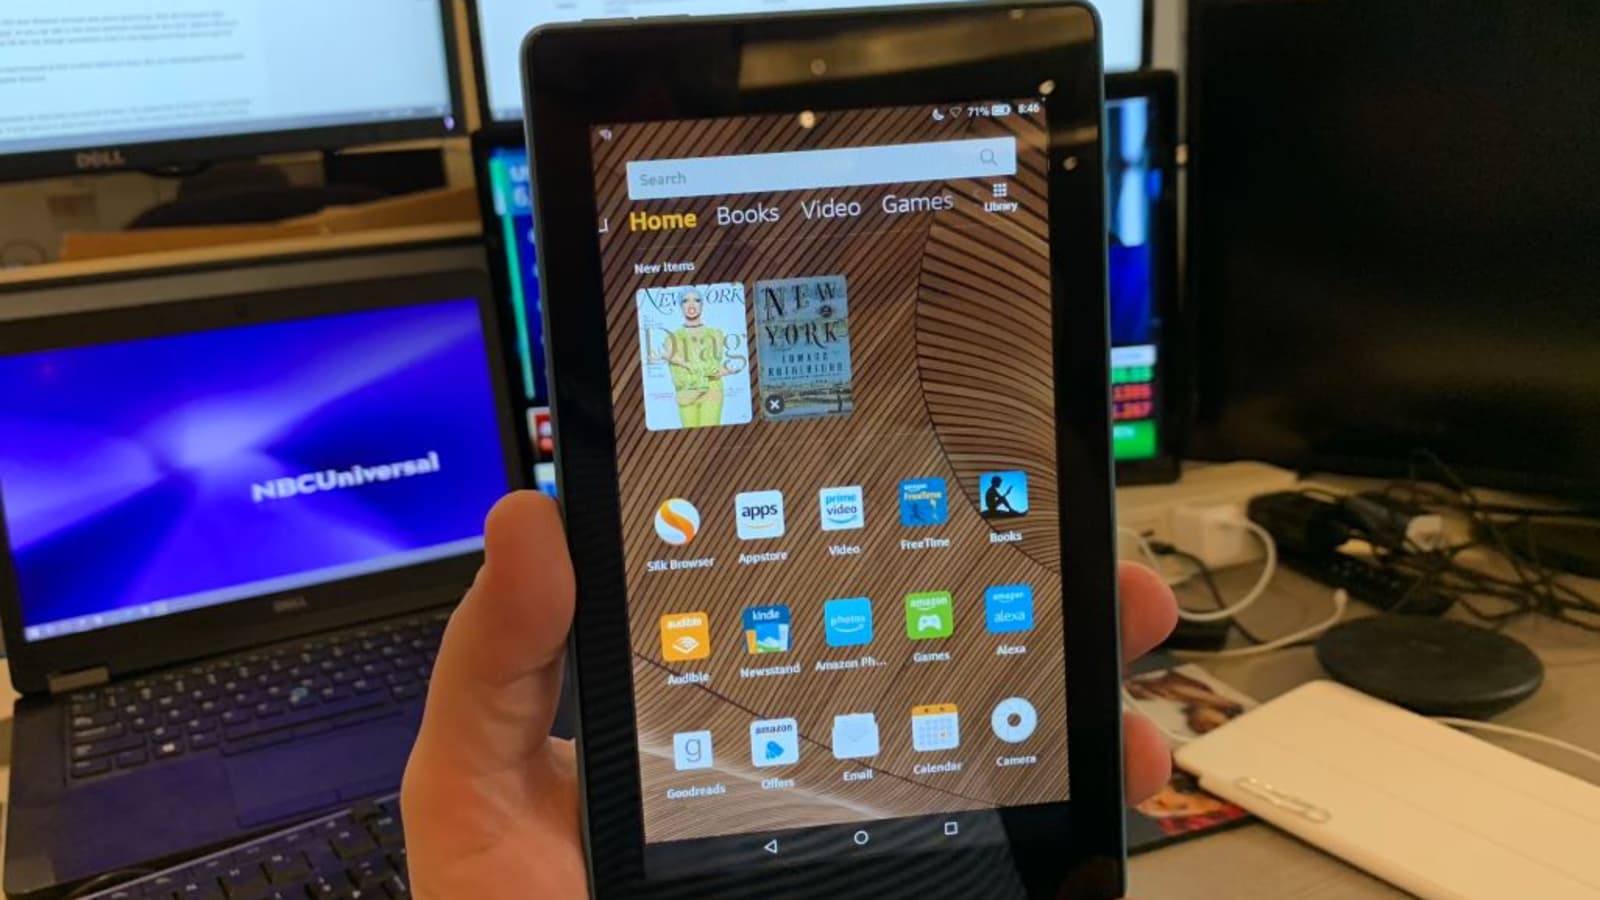 Can You Play Roblox On An Amazon Fire Tablet